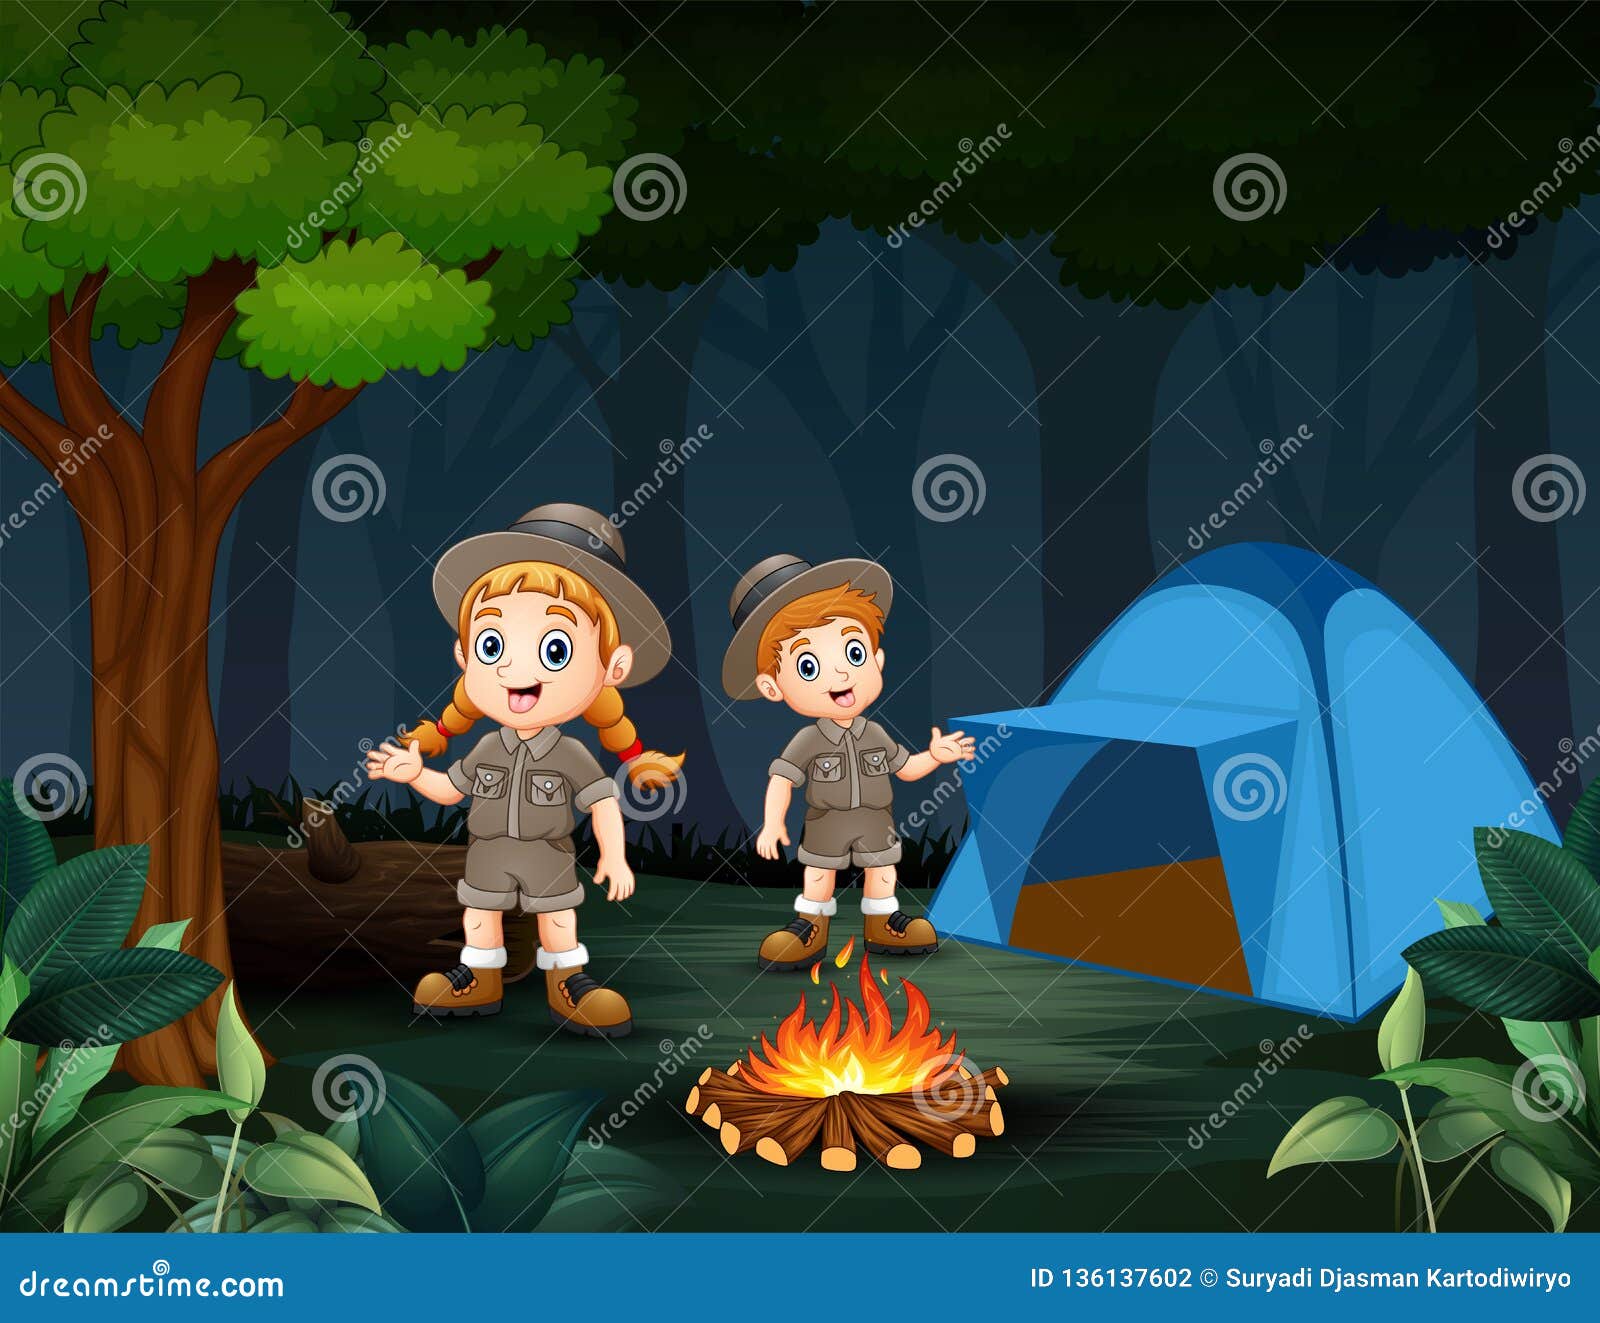 Cartoon Of Two Zookeepers Are Camping In The Forest Stock Vector ... Girl Cartoon Zoo Keeper